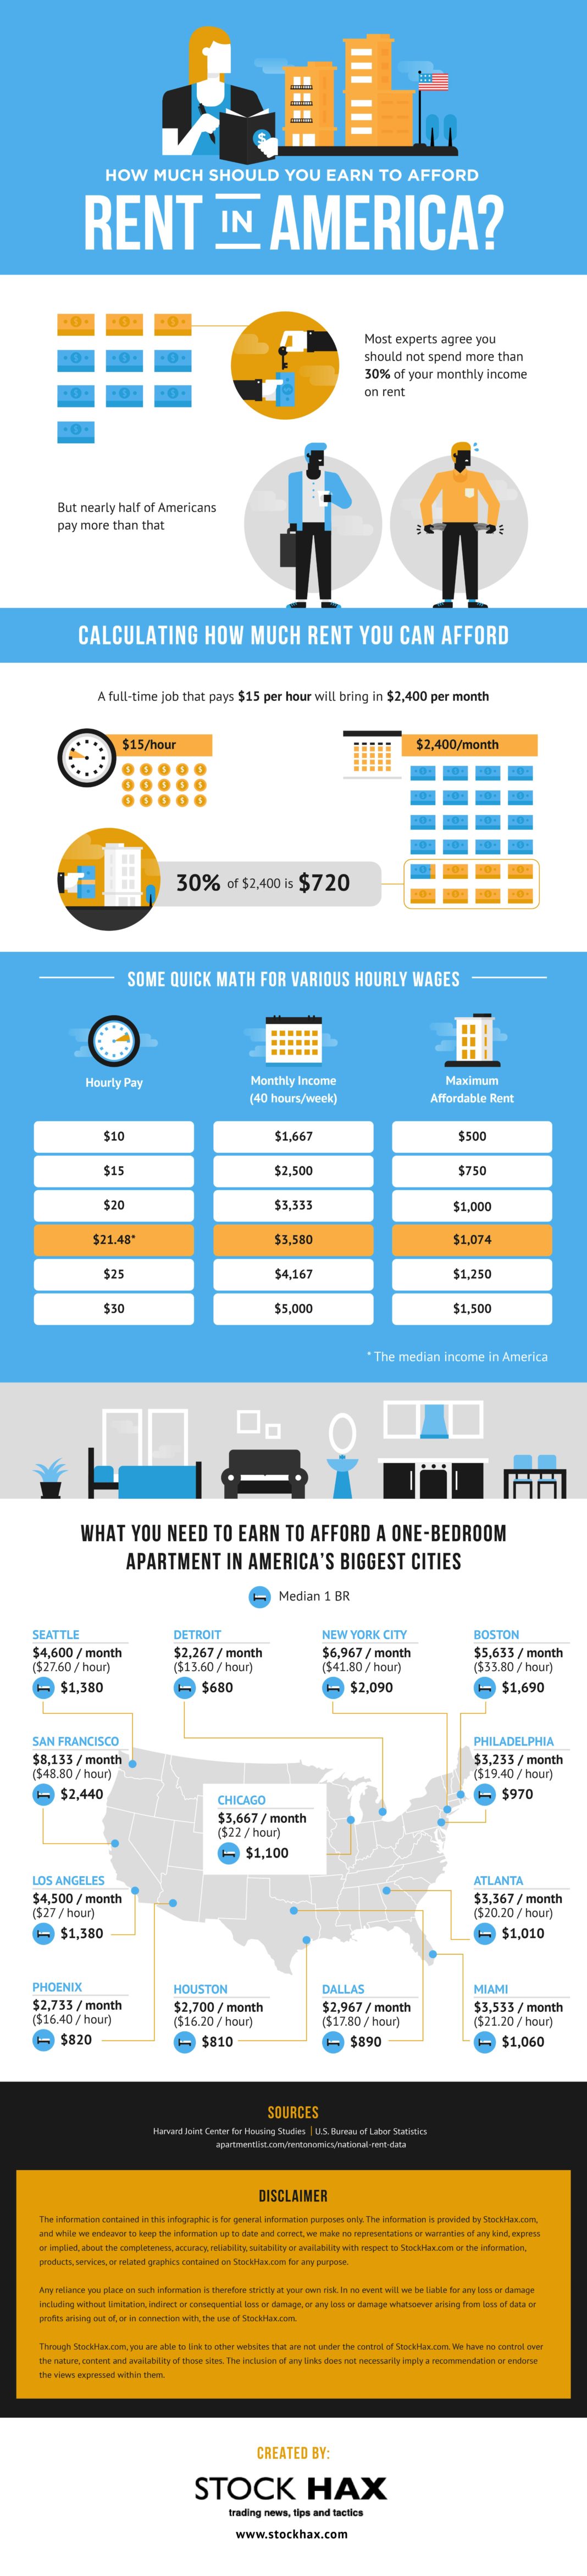 How Much Should You Spend on Rent? [Infographic]